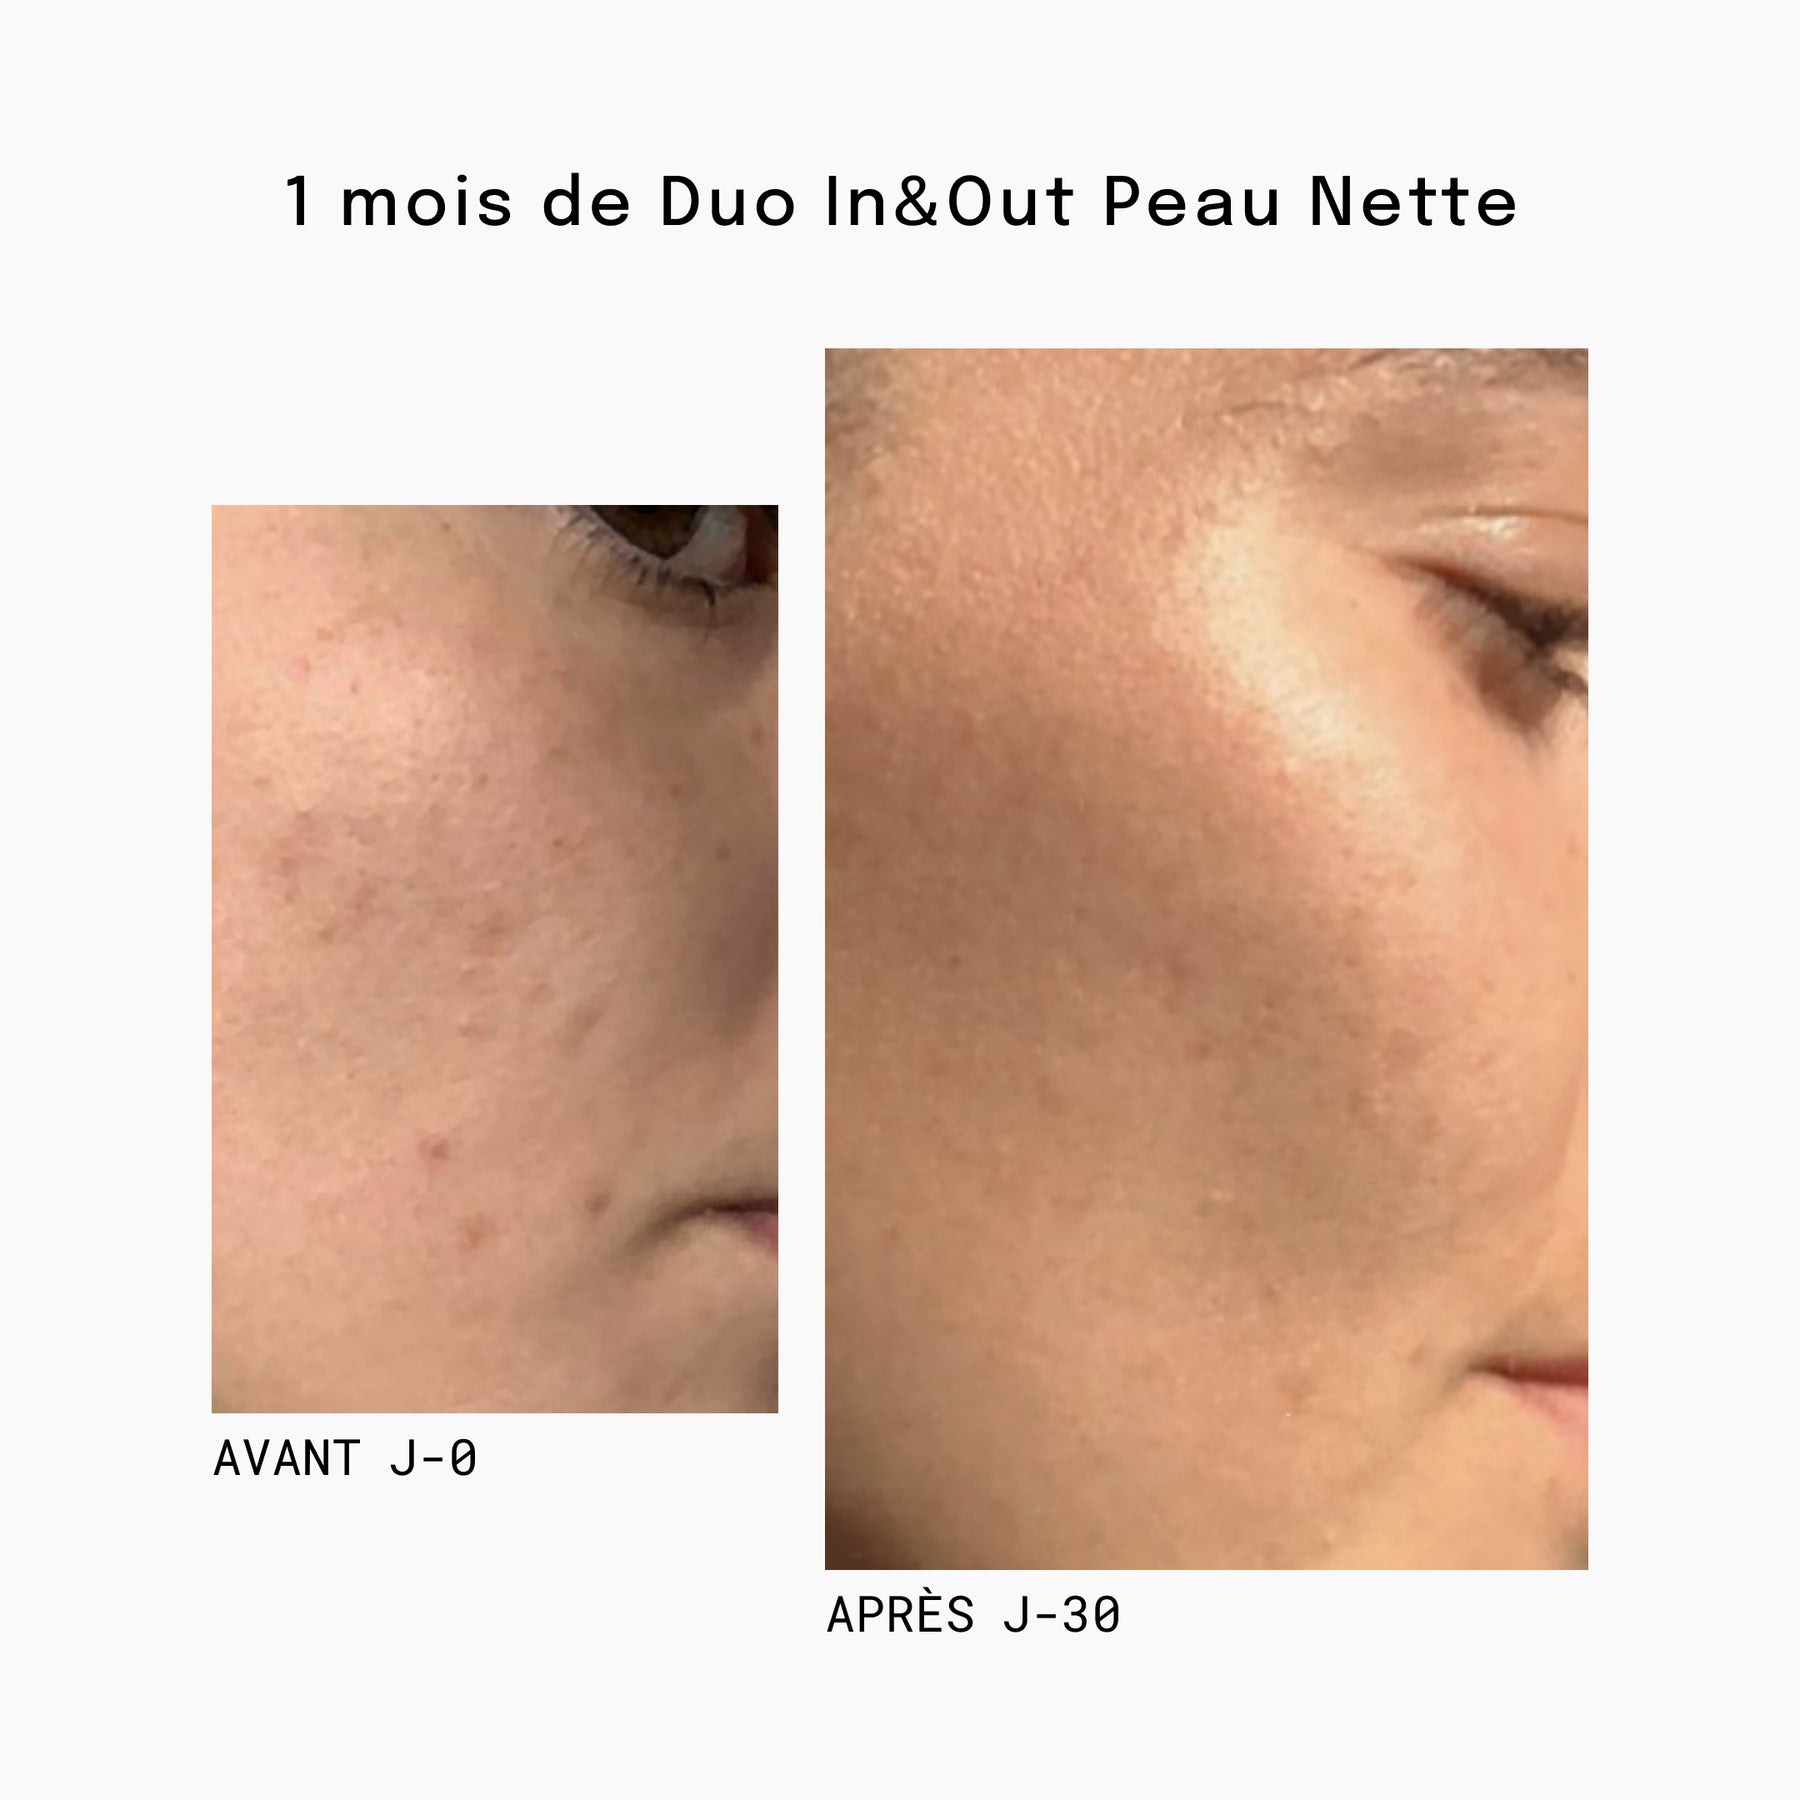 Duo In&Out Peau Nette